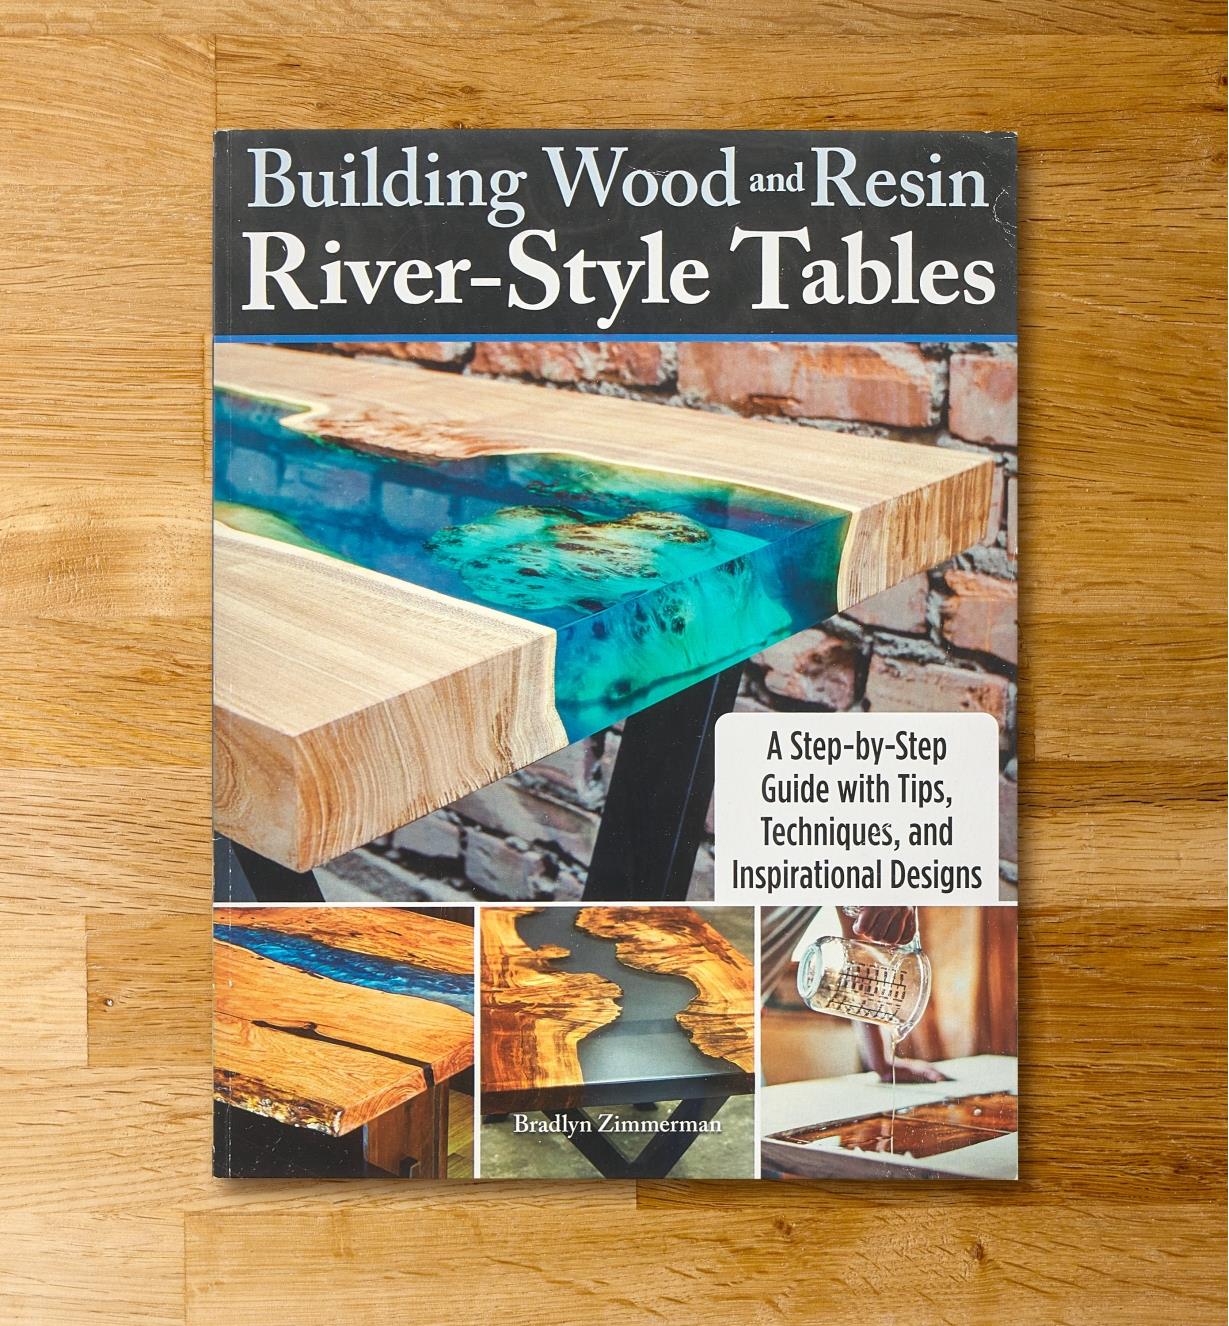 21L0112 - Building Wood and Resin River-Style Tables